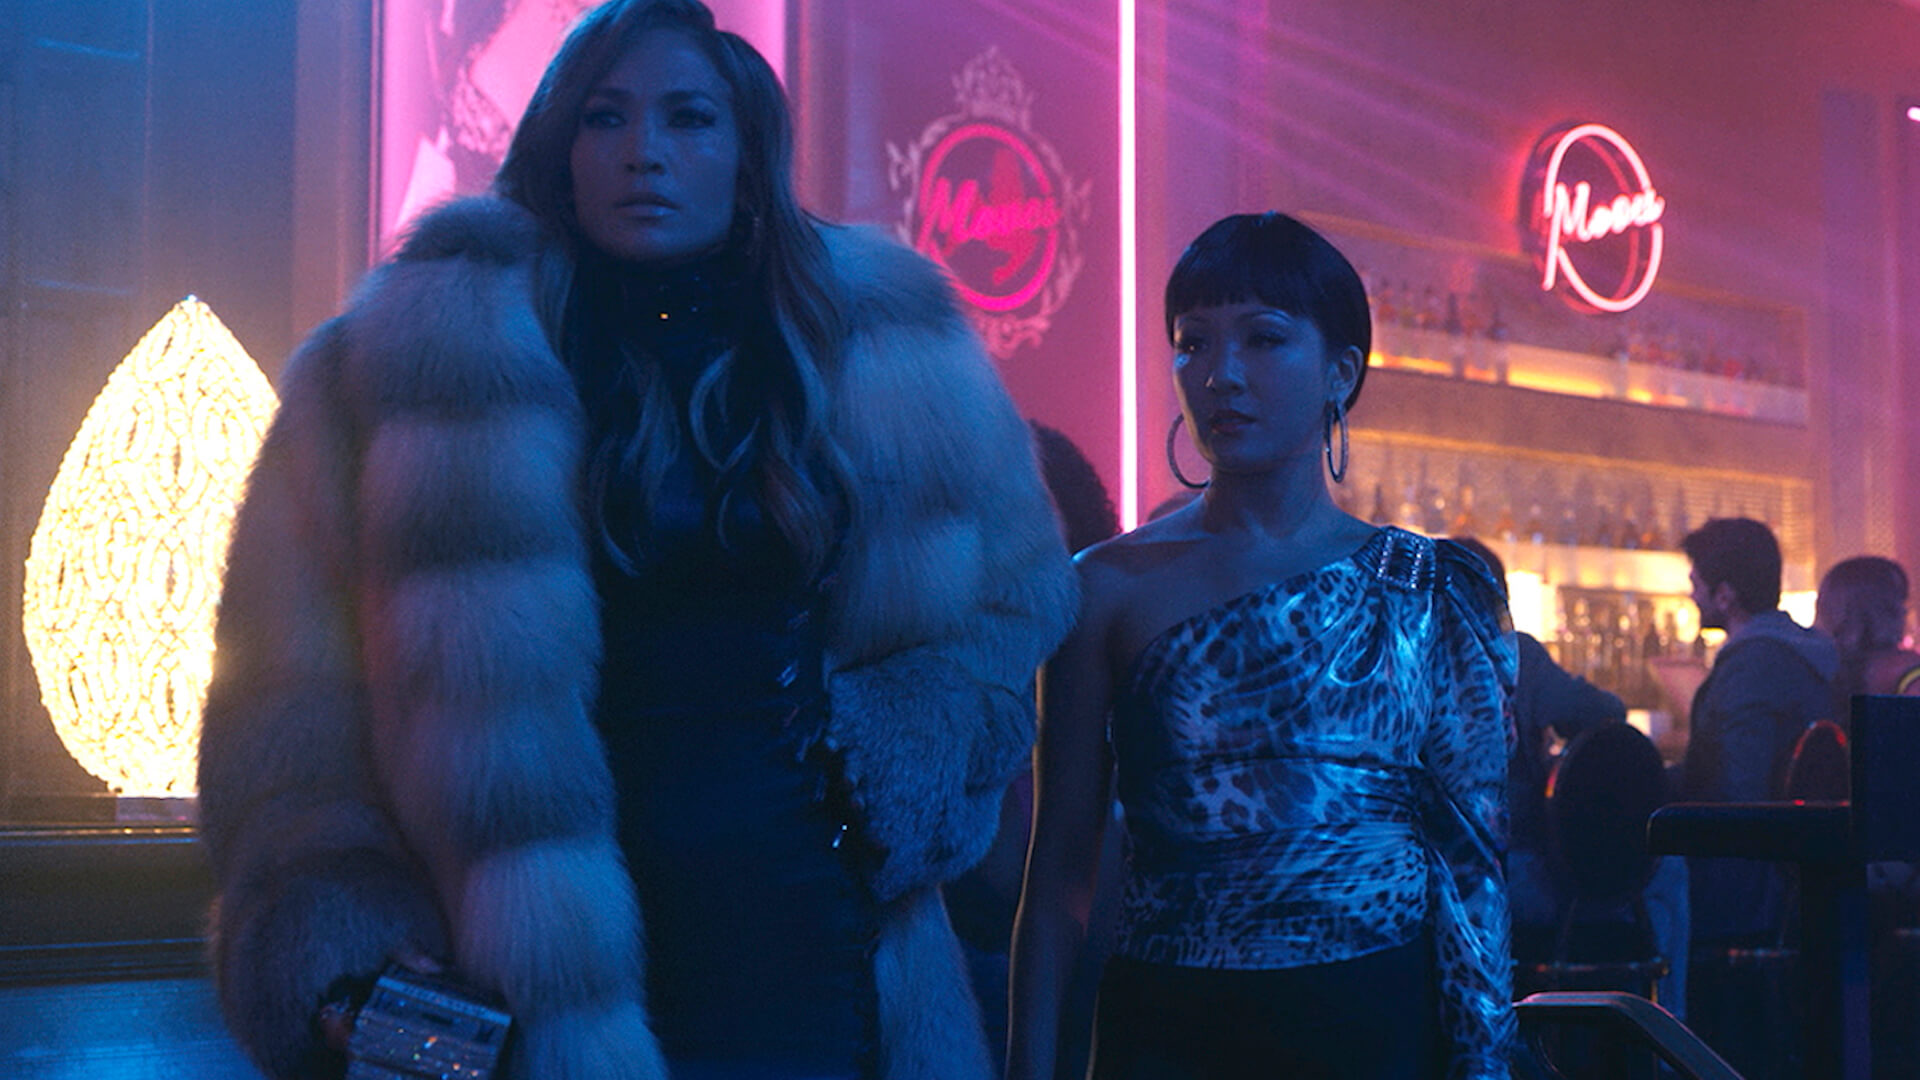 JLo and Constance Wu talk in Hustlers